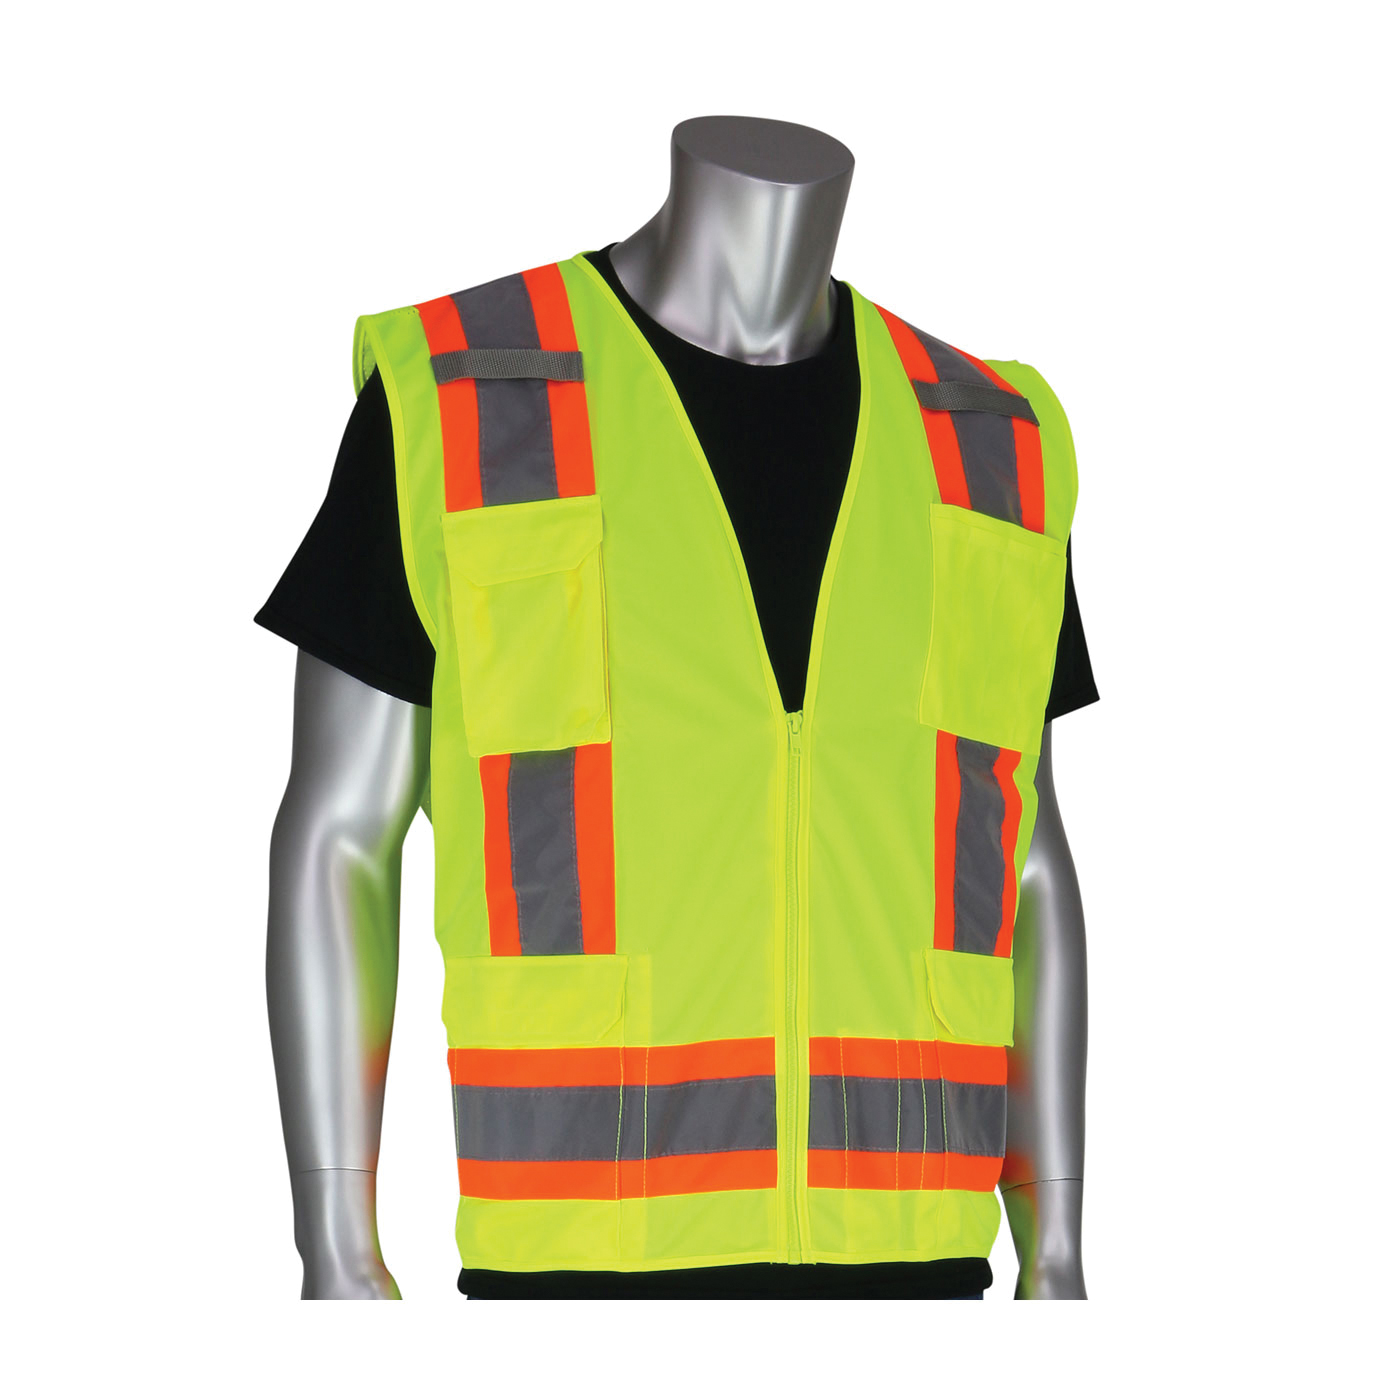 PIP® 302-0500S-YEL/4X 2-Tone Surveyor Safety Vest, 4XL, Hi-Viz Lime Yellow, Polyester/Solid Tricot, Zipper Closure, 11 Pockets, ANSI Class: Class 2, Specifications Met: ANSI 107 Type R